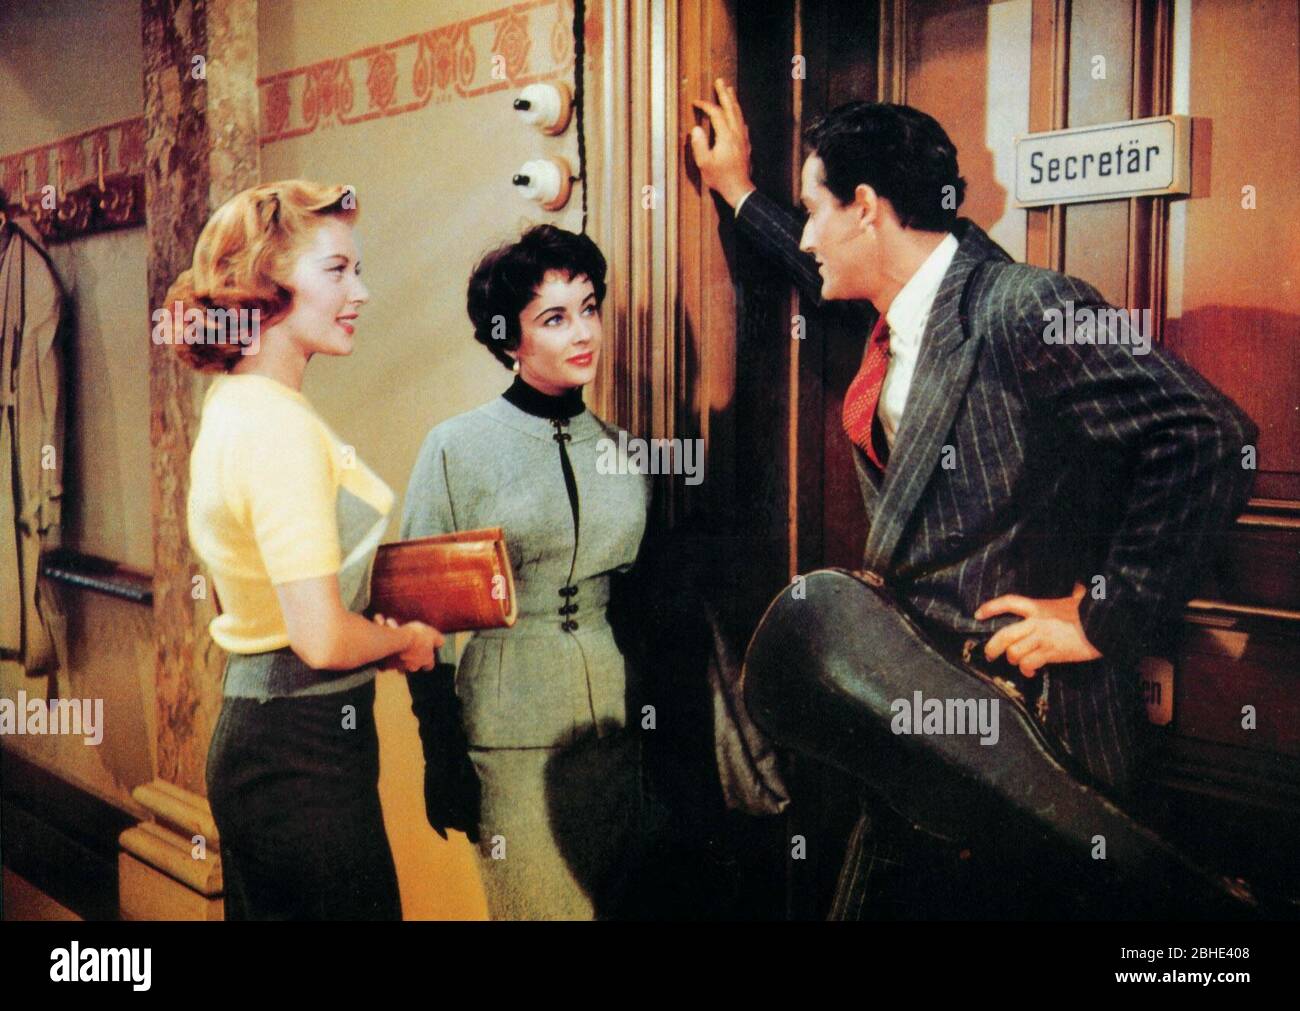 The Film Rhapsody 1954 High Resolution Stock Photography and Images - Alamy